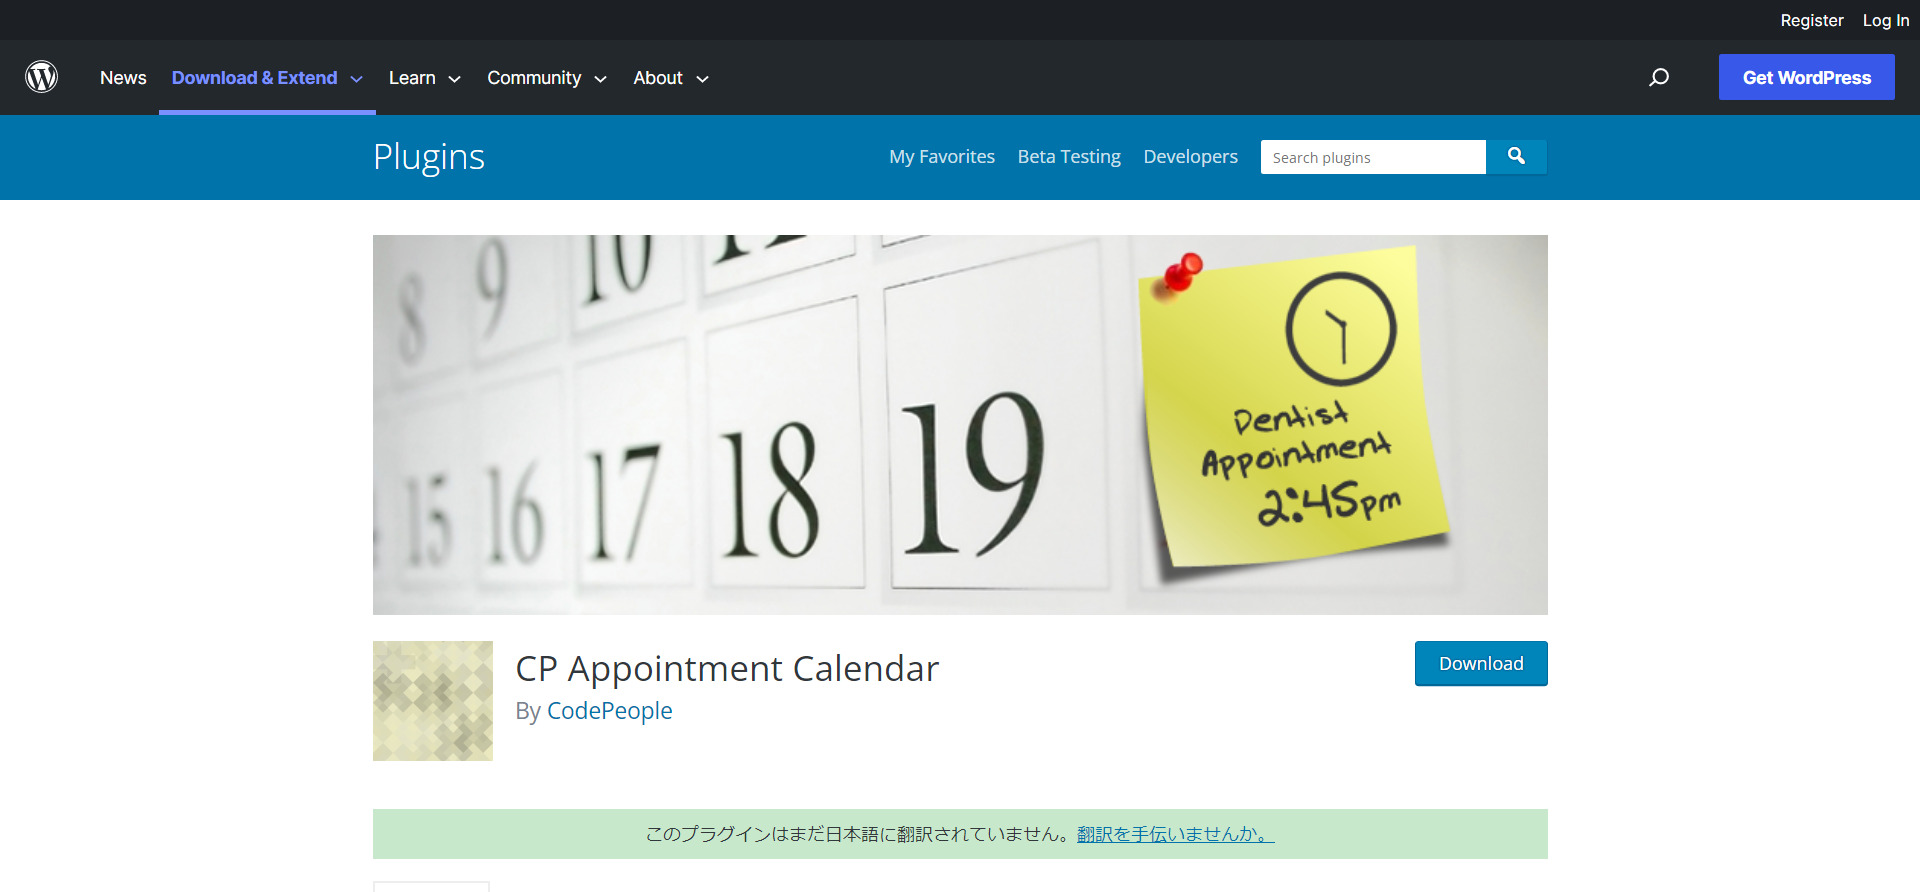 CP Appointment Calendar